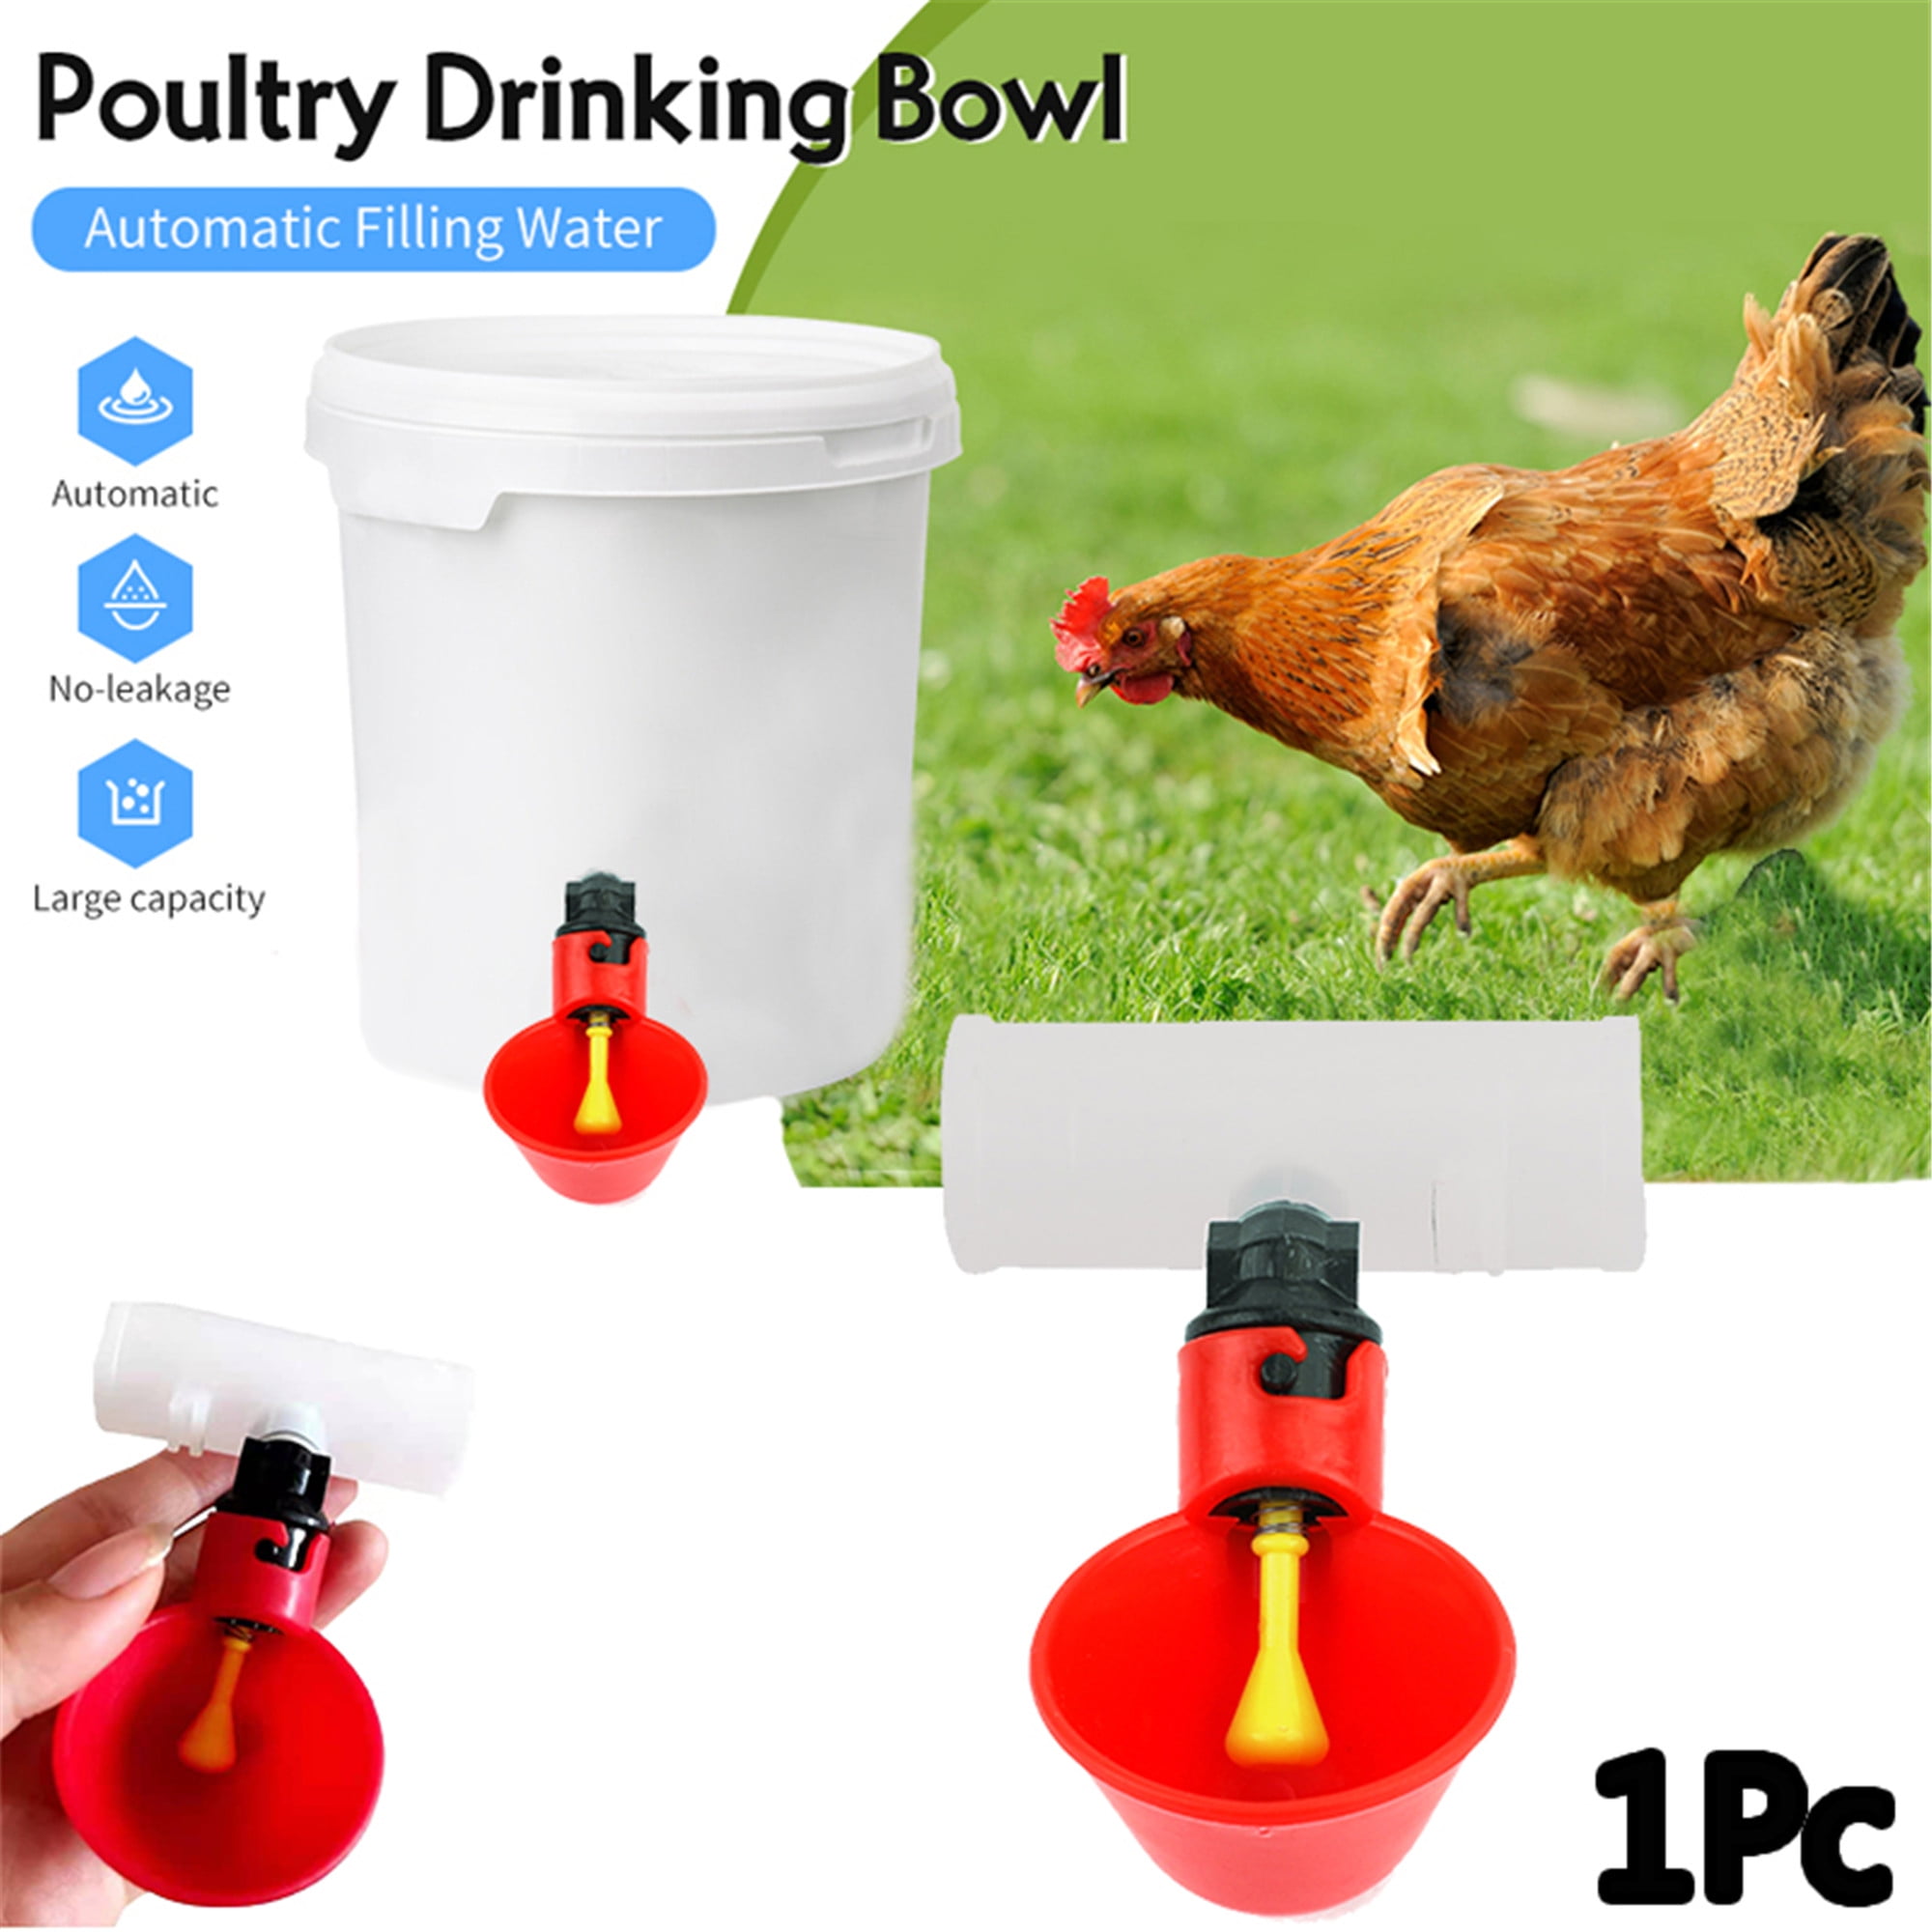 POULTRY DRINKER Waterers Chickens Hens Chicks Turkey Quail Poultry Birds 50 